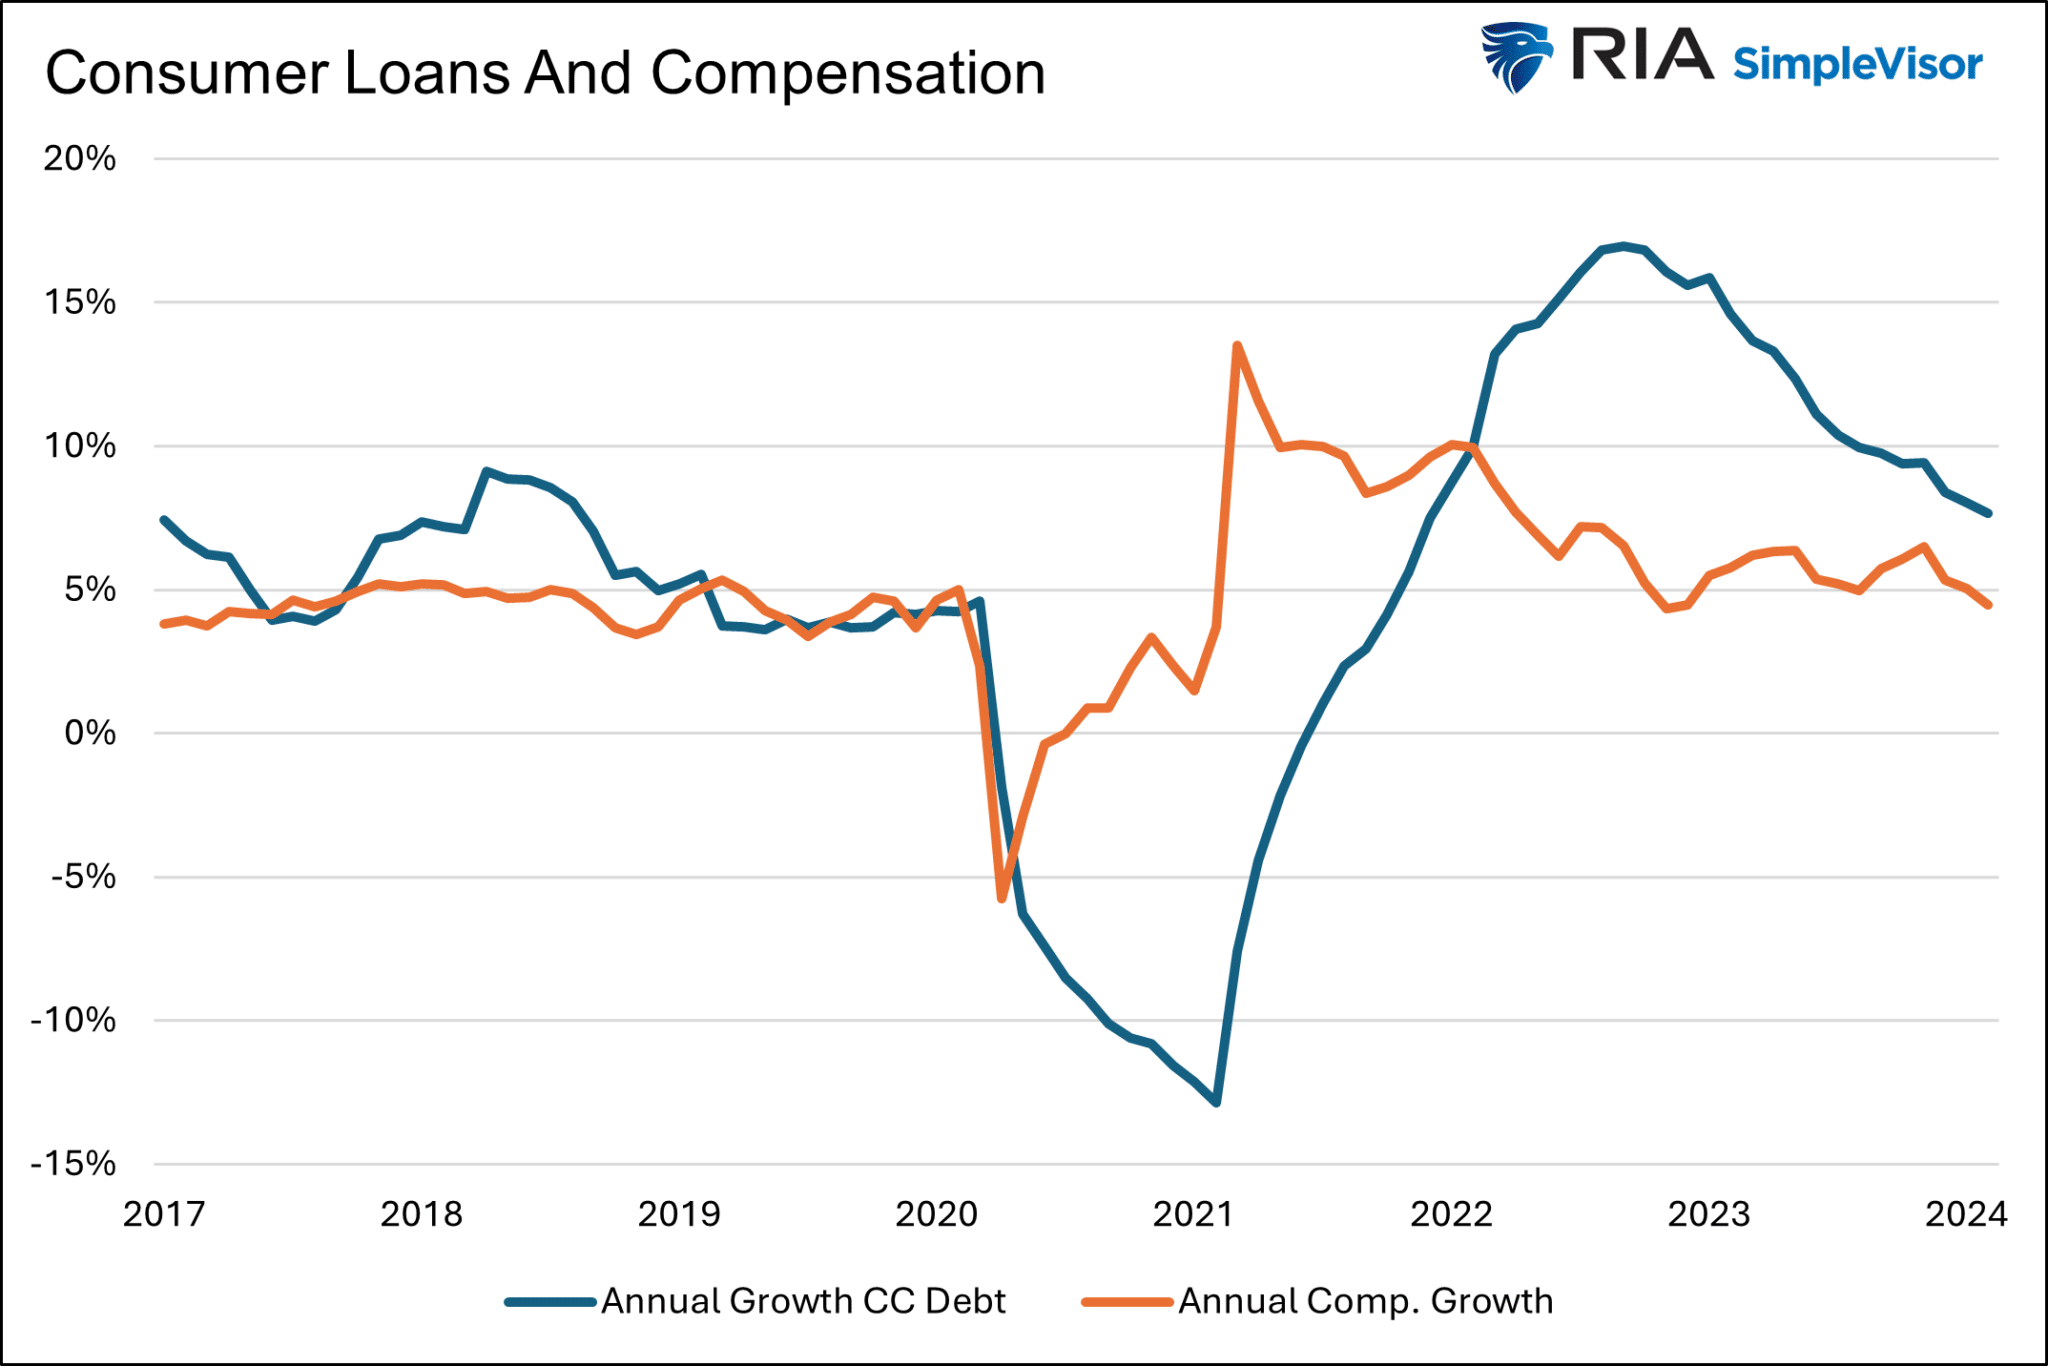 Consumer Loans And Compensation